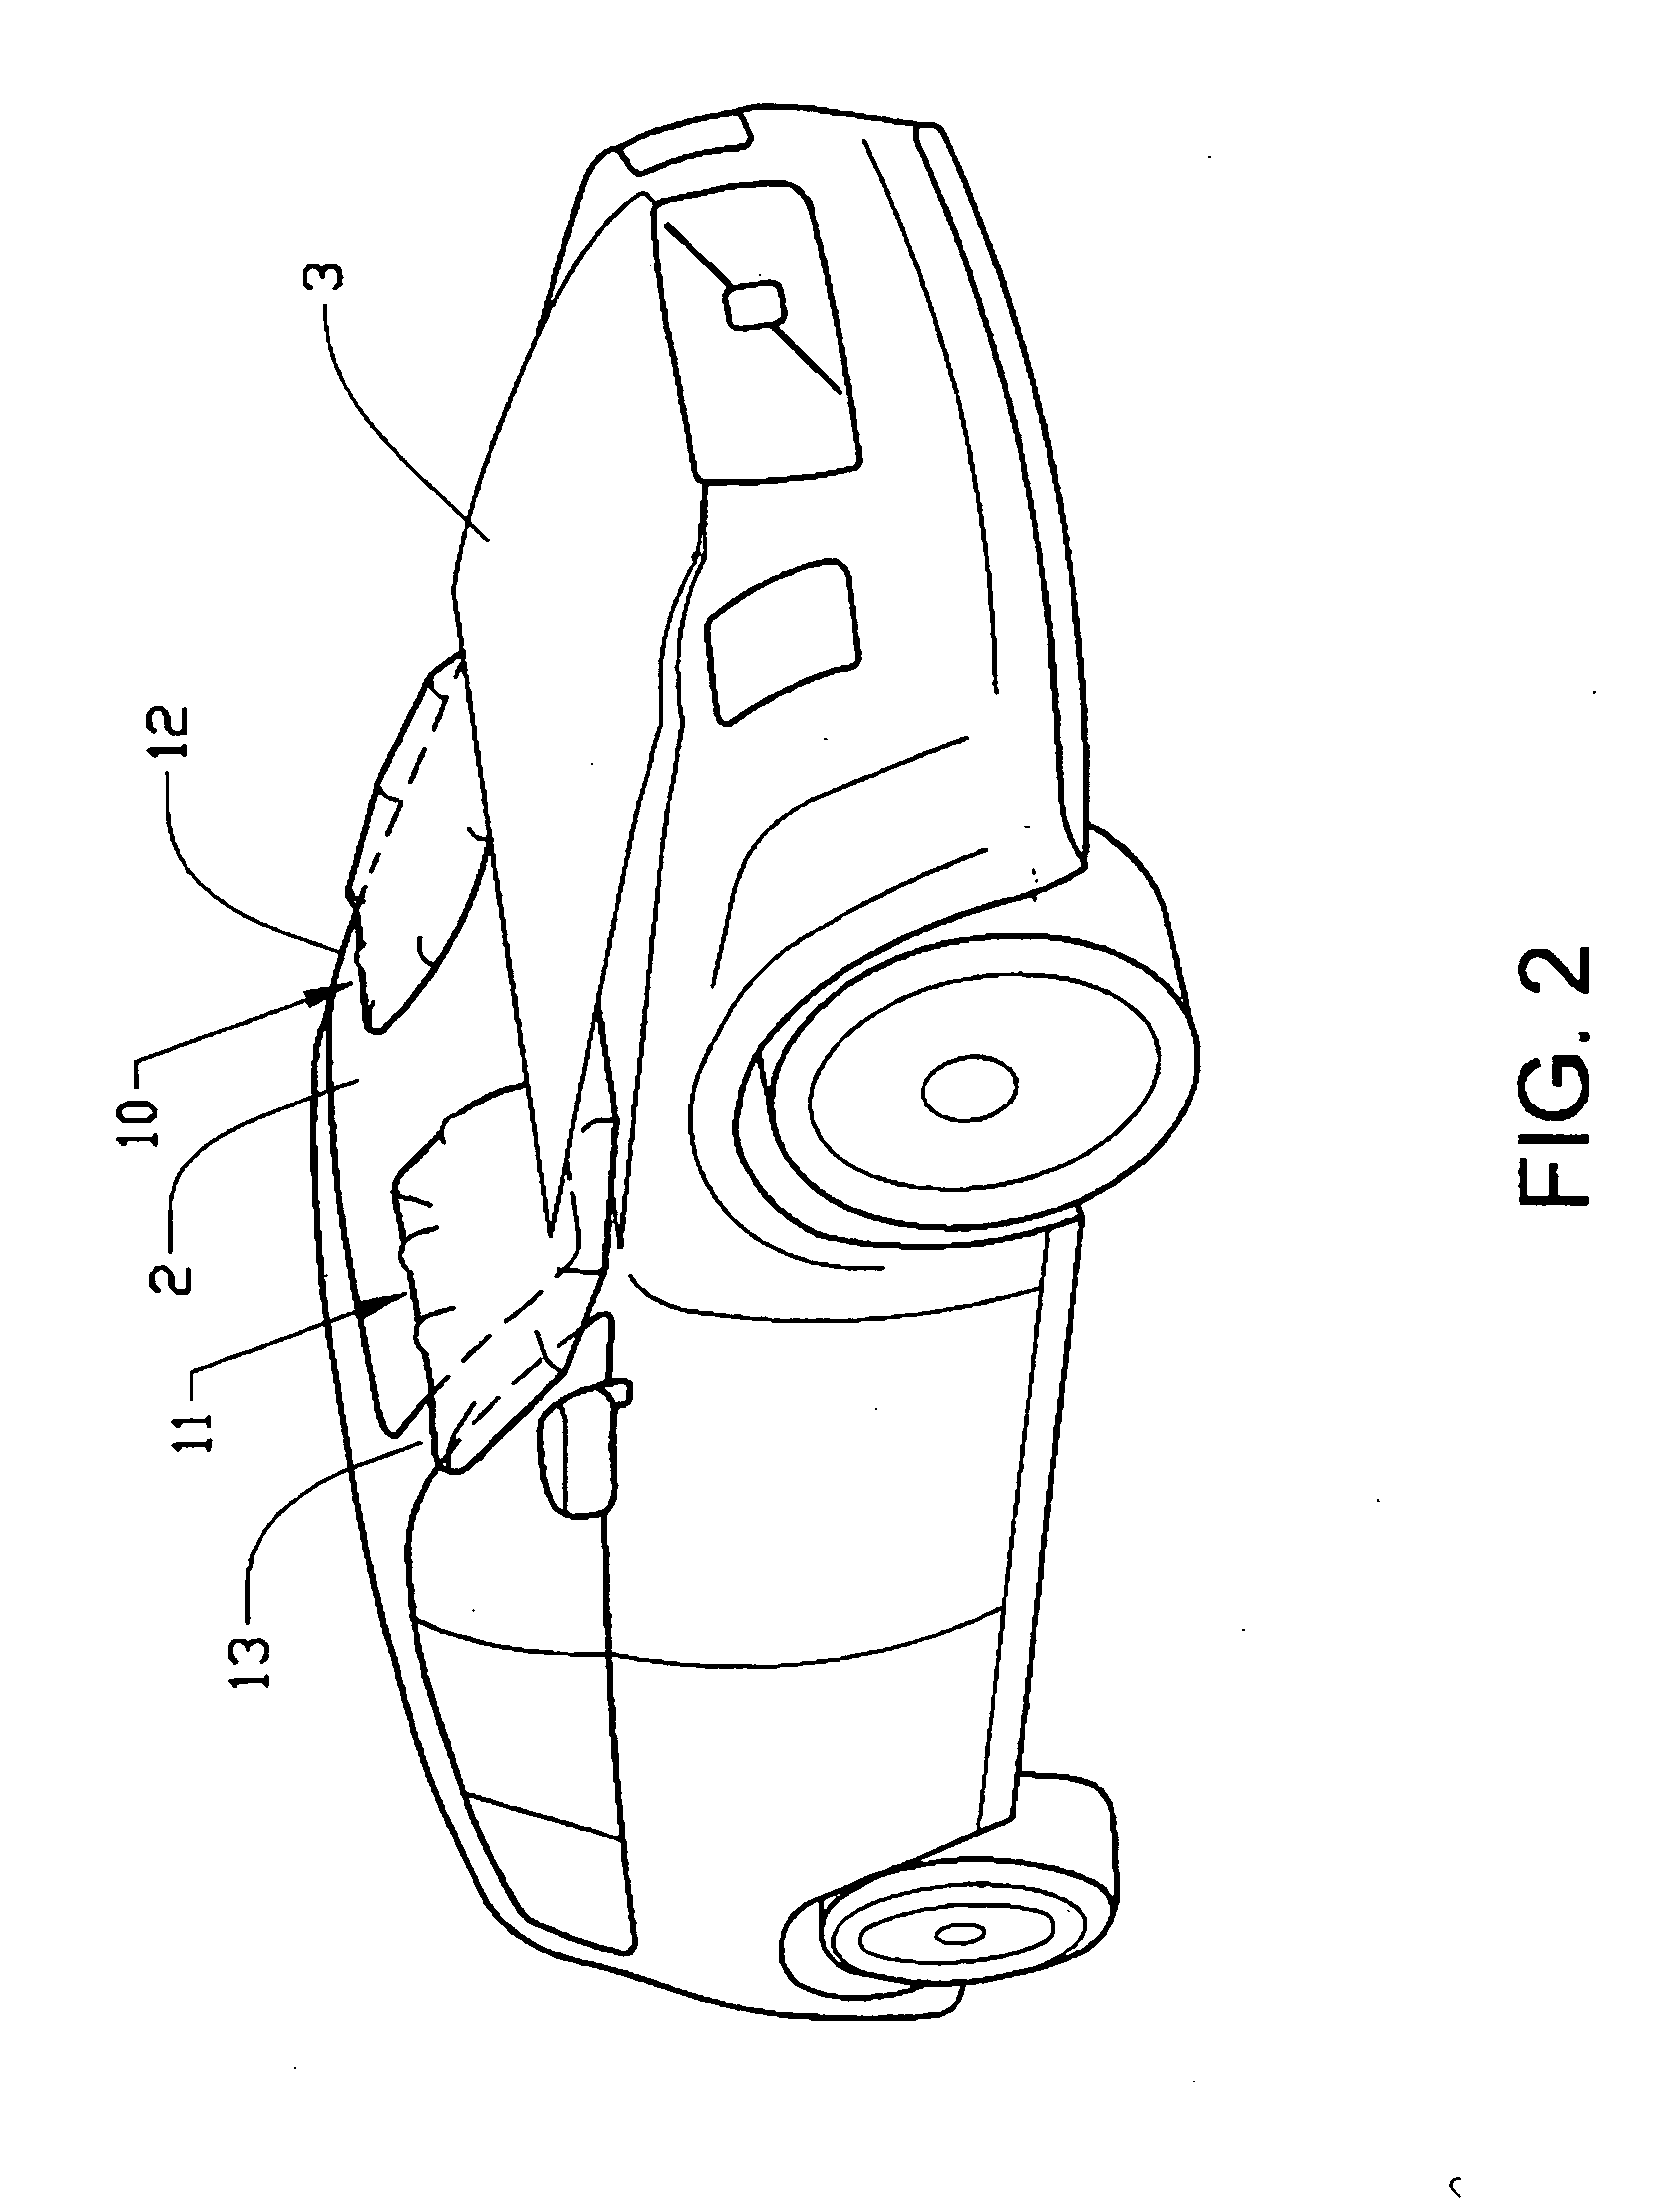 Device for reducing the impact for pedestrians